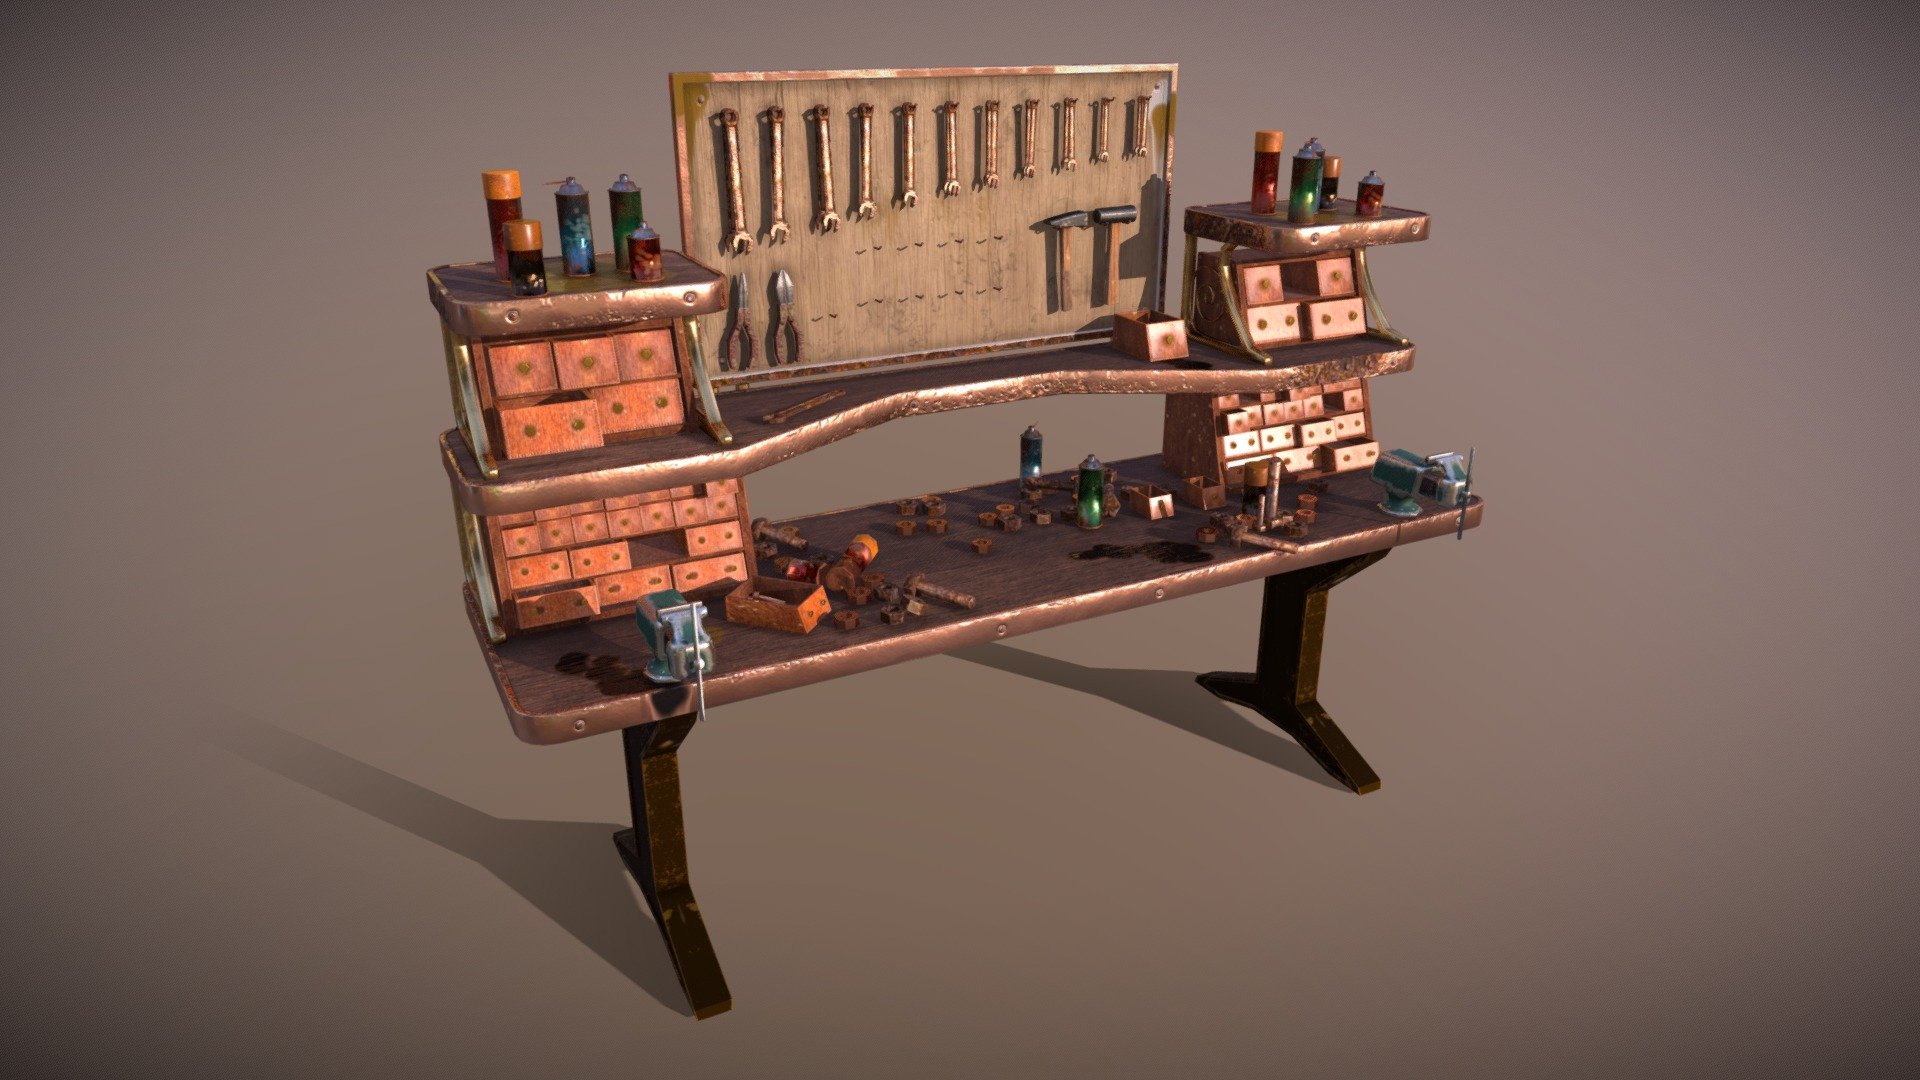 This is the workbench for the steampunk scene I made: 
https://www.artstation.com/artwork/N59Z5N

Made with Blender 2.8 and textured with Substance Painter.

The download includes:





The main FBX with 2K textures




FBX with clean workbench




FBX with only tools




Unity (URP) and Unreal (Packed) textures


 - Steampunk Workbench - Buy Royalty Free 3D model by Sybren Westendorp (@sybriart) 3d model